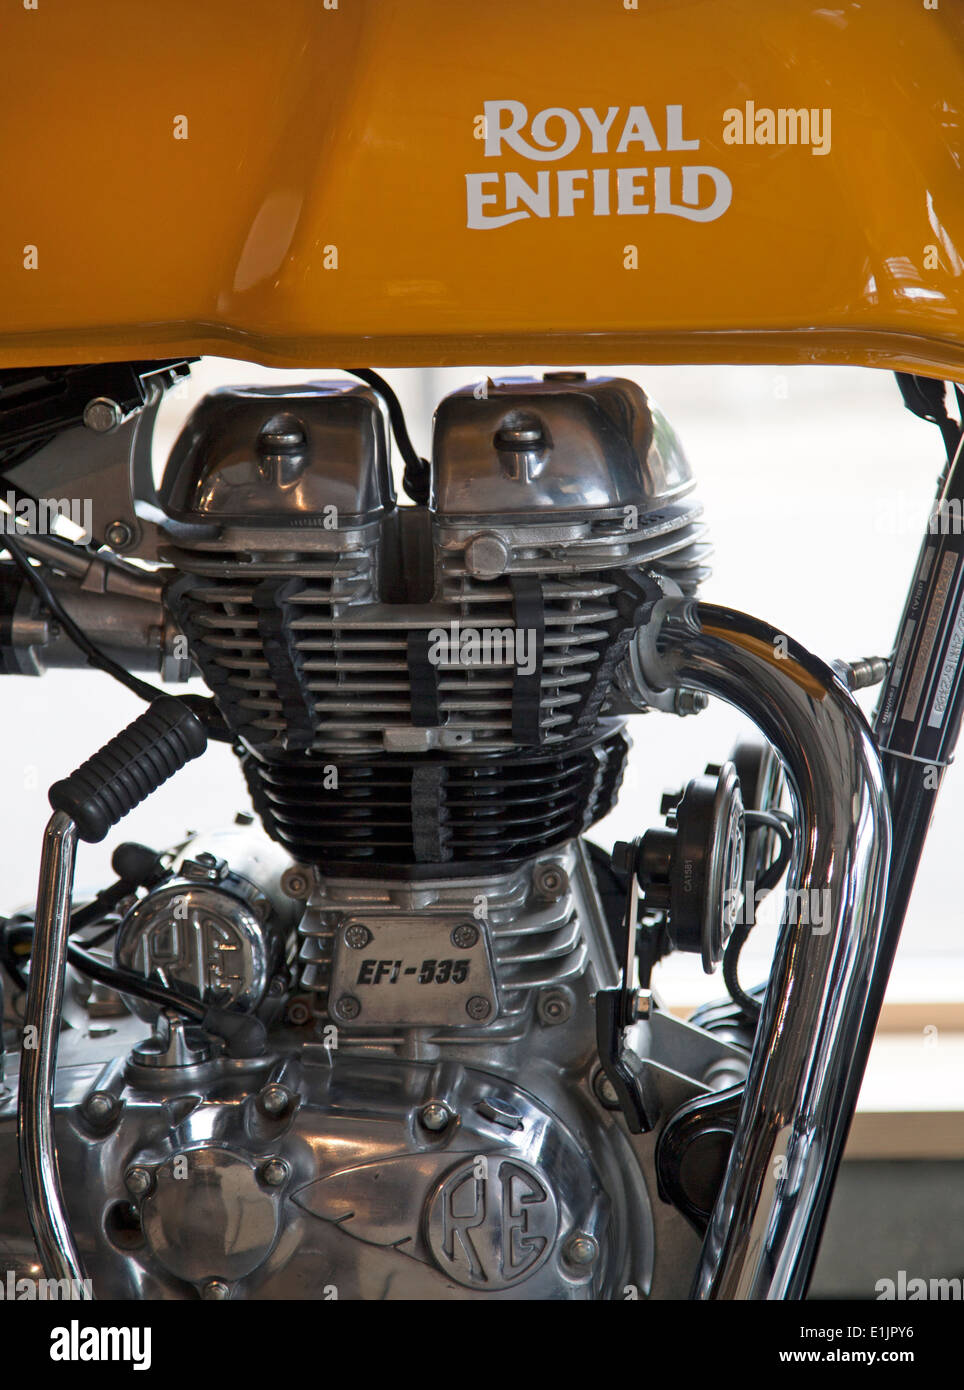 Detail of new Royal Enfield motorcycle, London Stock Photo